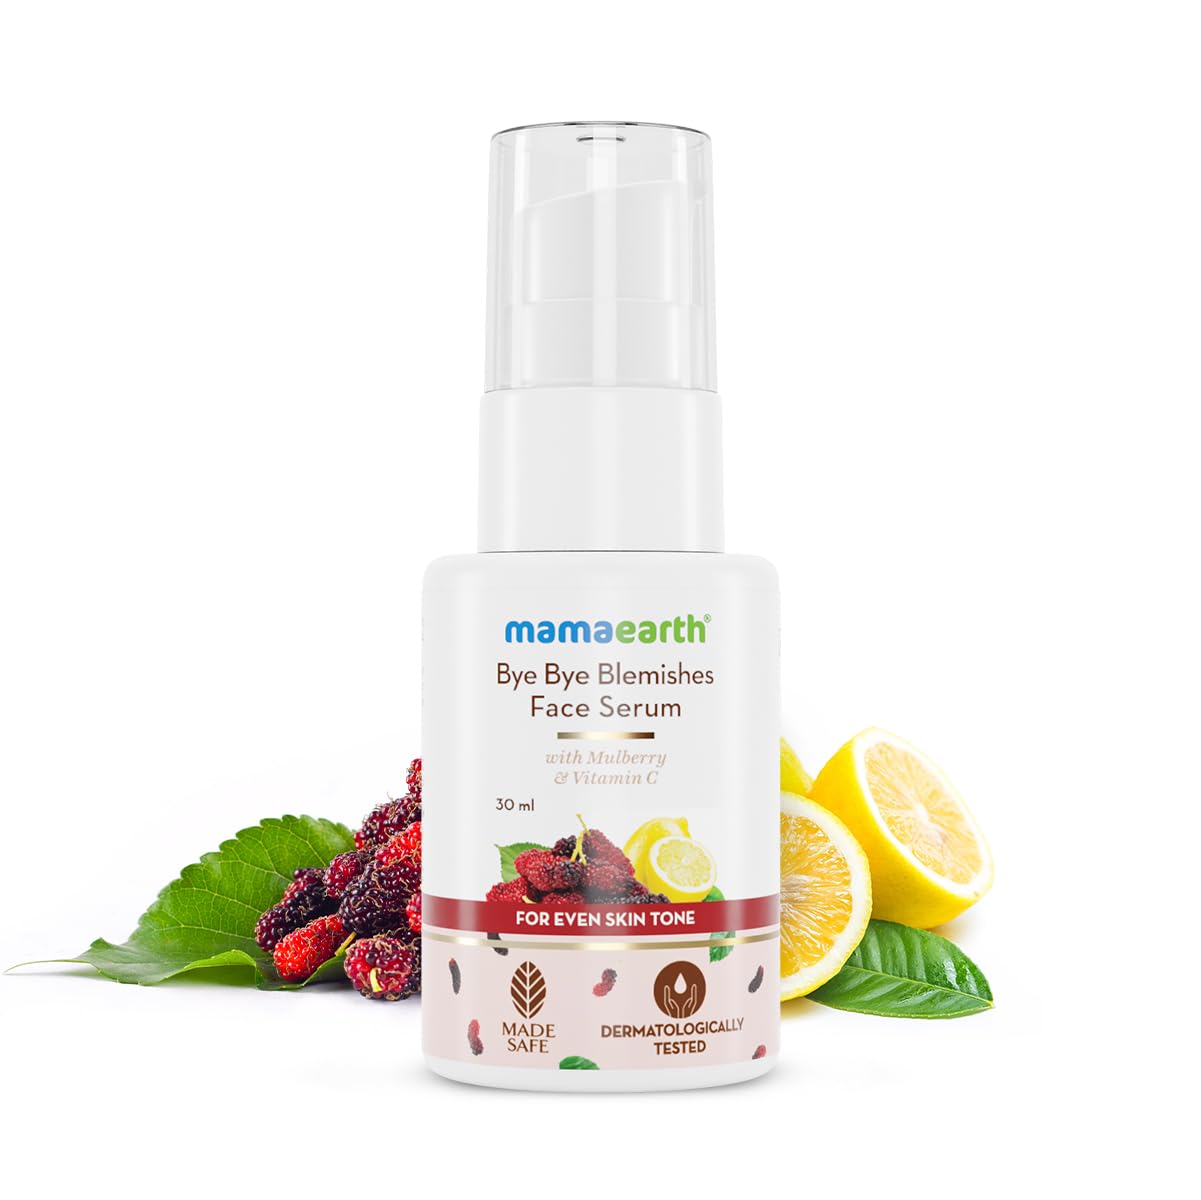 Mamaearth Bye Bye Blemishes Face Serum with Mulberry and Vitamin C for Even Skin Tone - 30ml